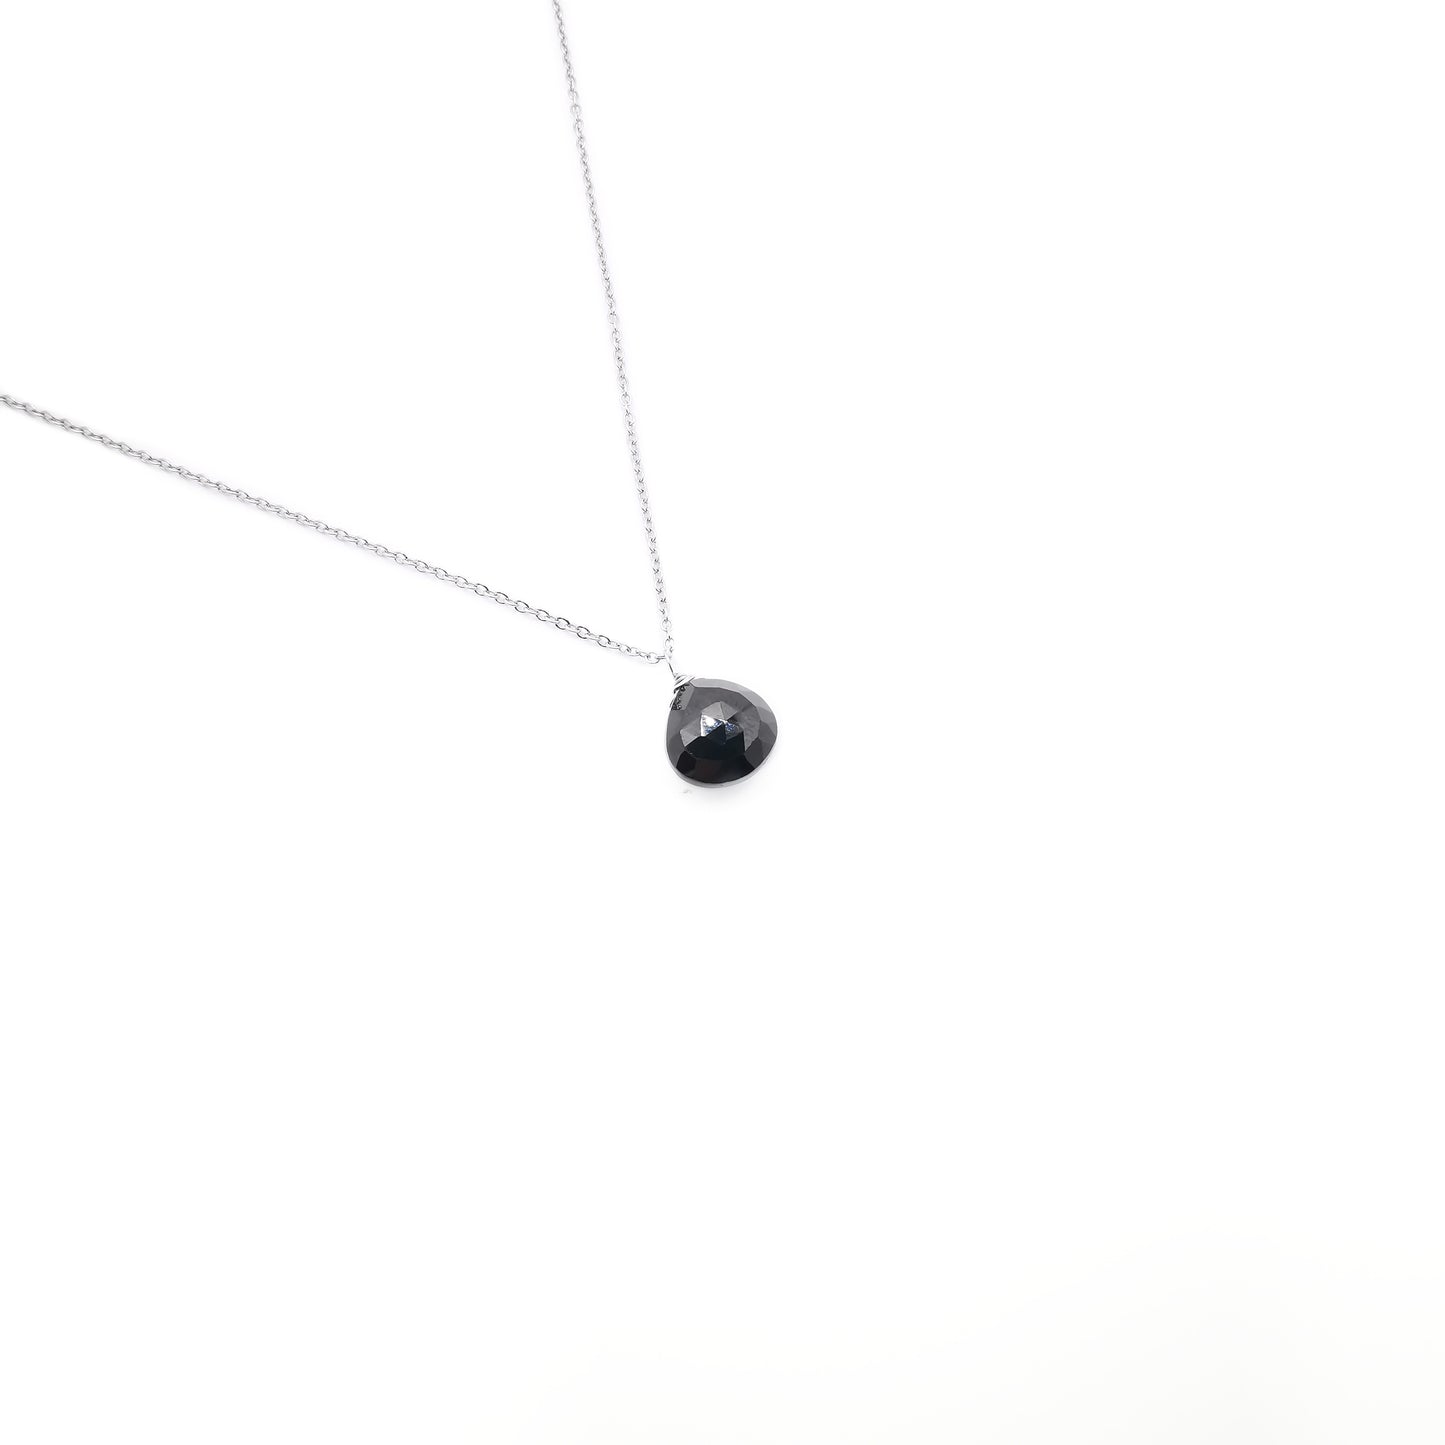 Black Spinel Pear Shaped Necklace